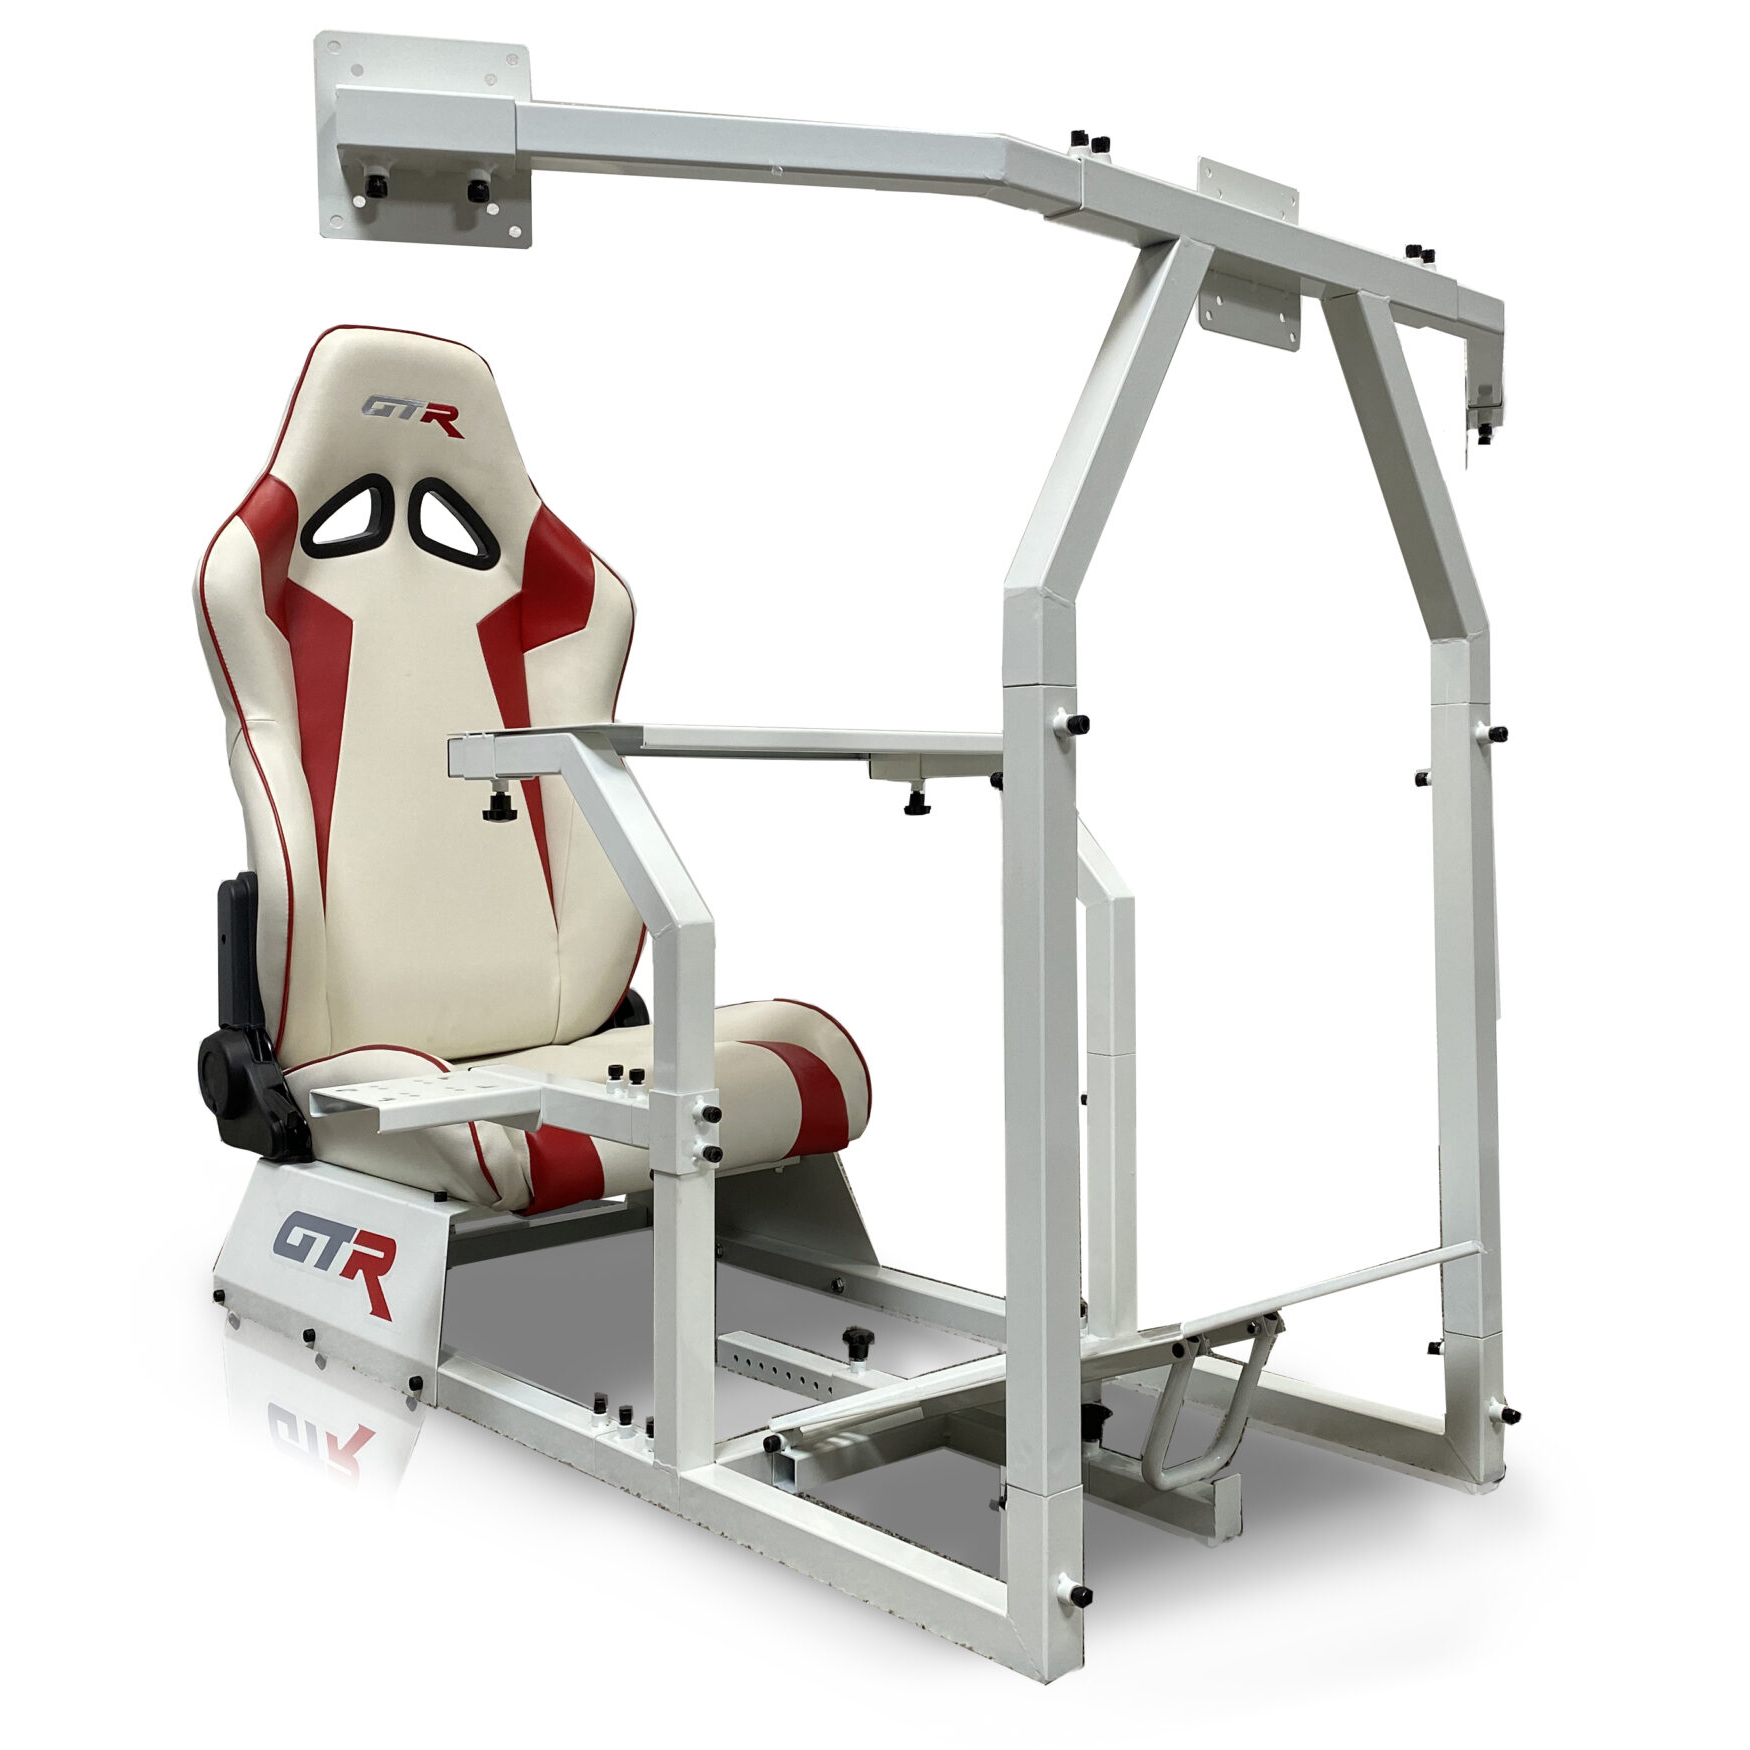 GTR Simulator GTA-F Model White Frame Triple Monitor Stand with Adjustable  White and Red Seat